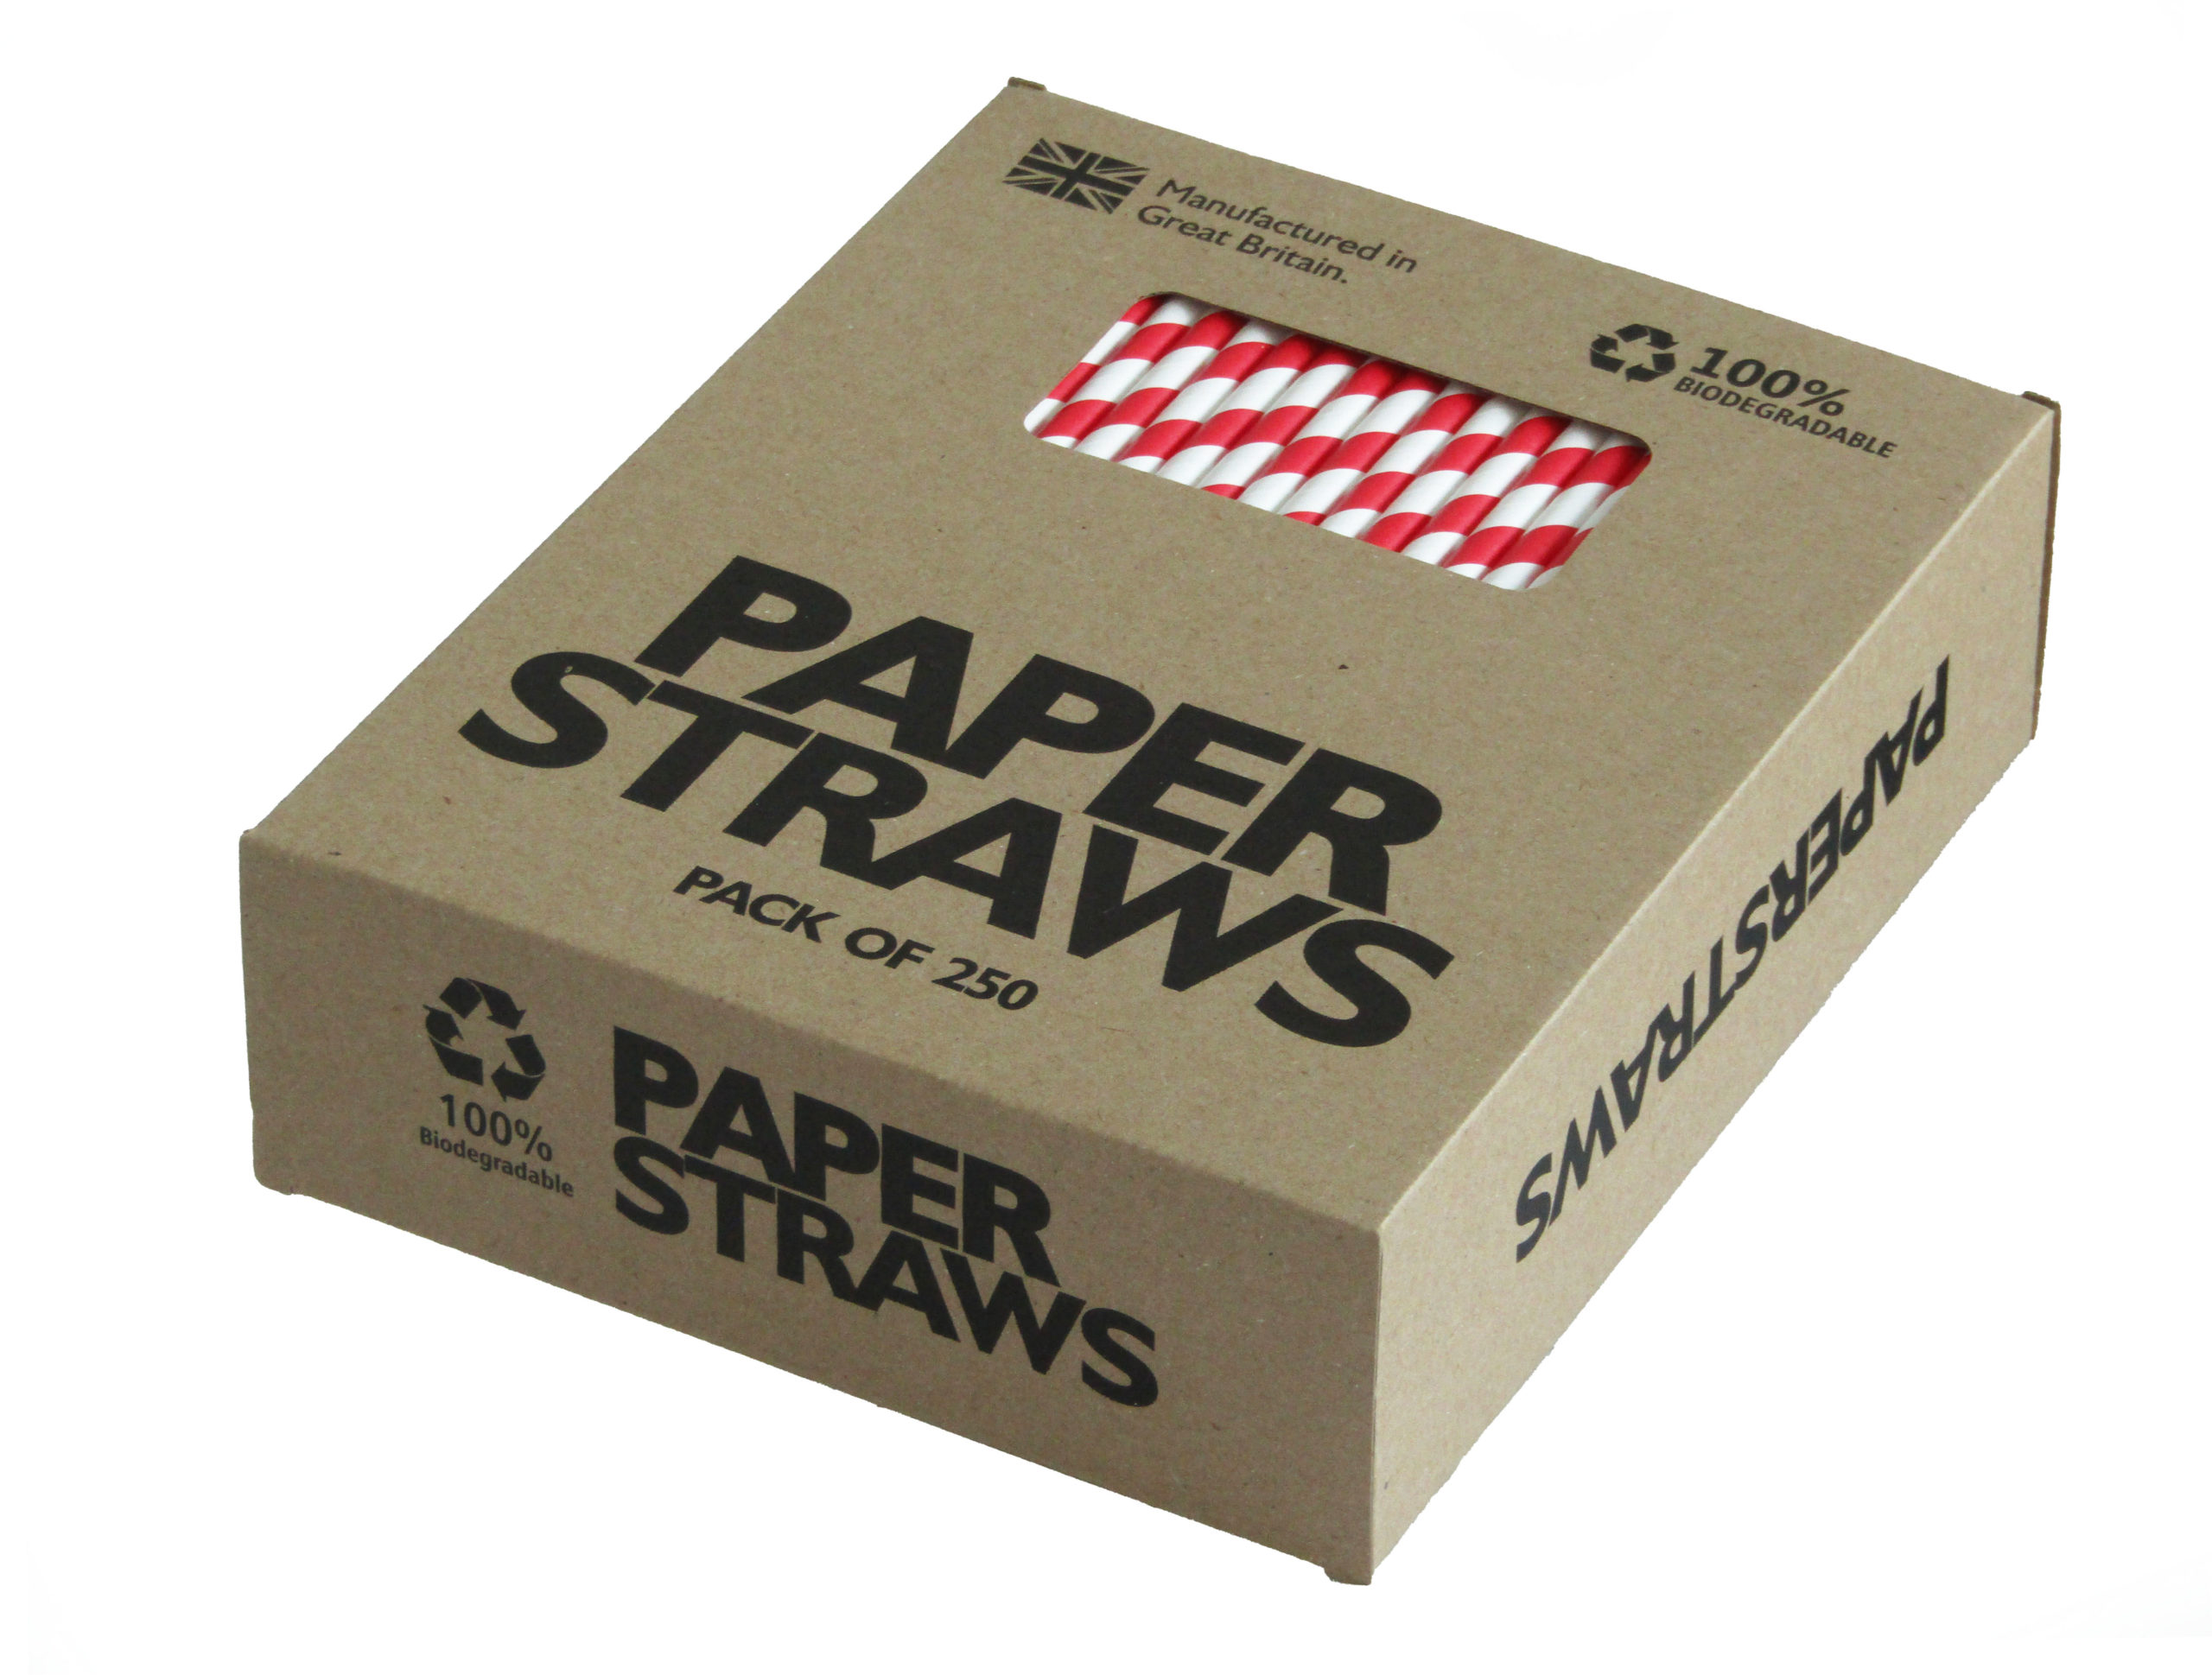 Pack of 250 Cold Drinks & Juices Suitable for All Occasions Including Birthdays & Parties Ideal for Cocktails Black & White Striped Paper Straws - British Made Biodegradable Paper Drinking Straws 